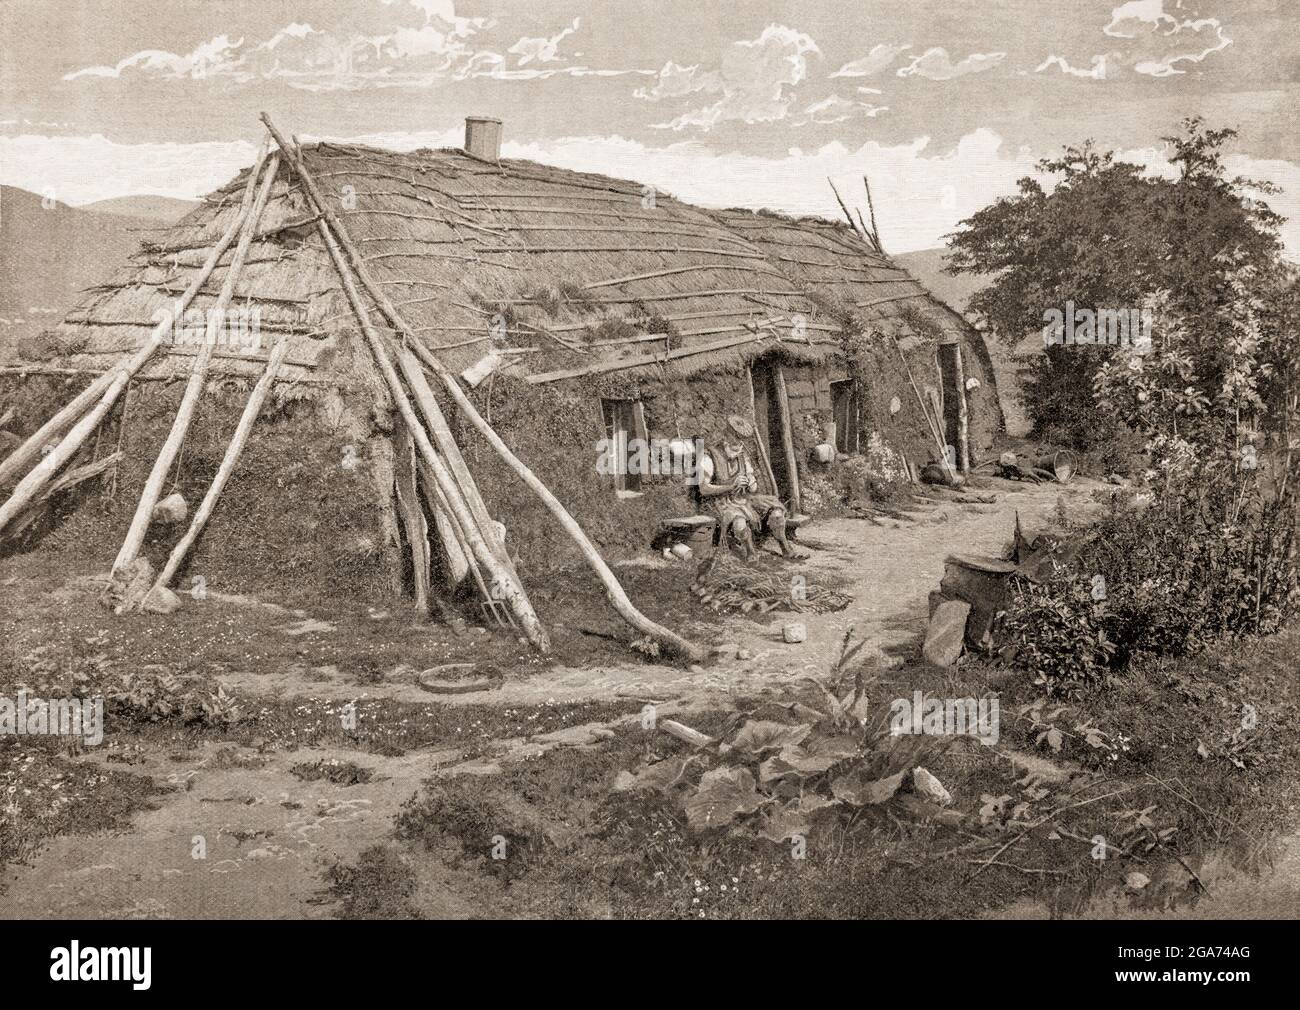 A late 19th century view of a crofter's cottage near Lochaber in the Scottish Highlands. Crofting is a form of land tenure and small-scale food production particular to Scotland. During the 19th century individual crofts were established on the better land, and a large area of poorer-quality hill ground was shared by all the crofters of the township for grazing their livestock. The Crofters' Holdings (Scotland) Act 1886 provided for security of tenure, and encouraged tenants to improve the land under their control, ensuring control could be transferred within families to future generations. Stock Photo